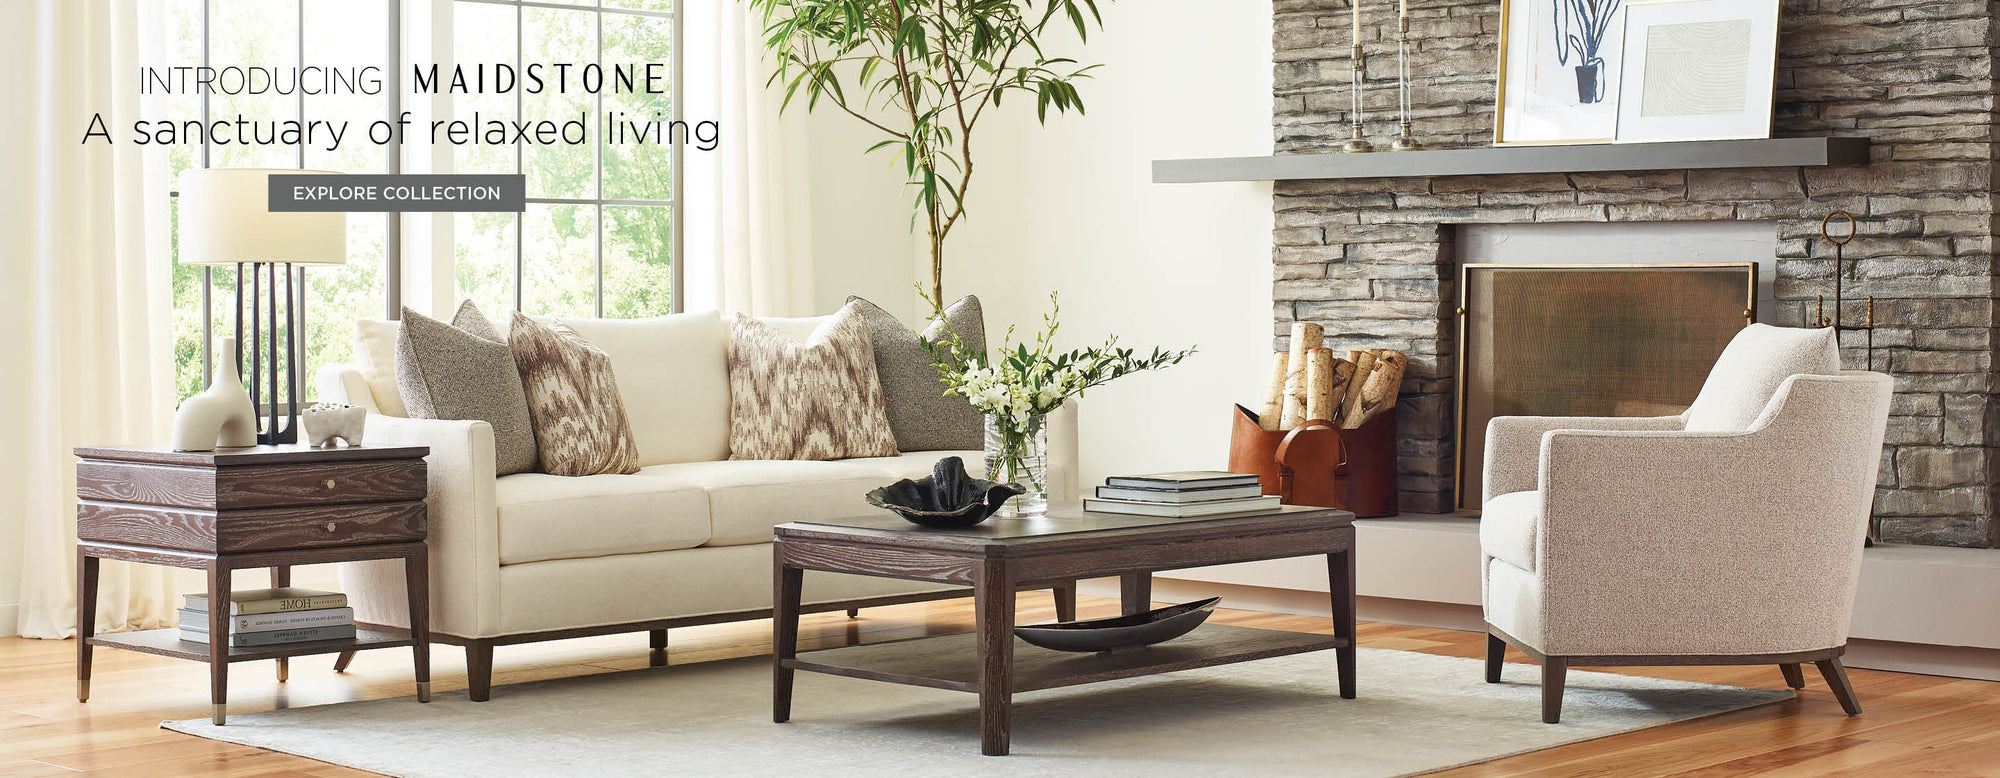 Lifestyle of the Maidstone Sofa, accent chair, side table, and cocktail table. They are sitting in front of a stone fireplace with a large window behind the sofa letting in natural light. The image has text on it reading "Introducing Maidstone. A sanctuary of relaxed living. Explore collection."